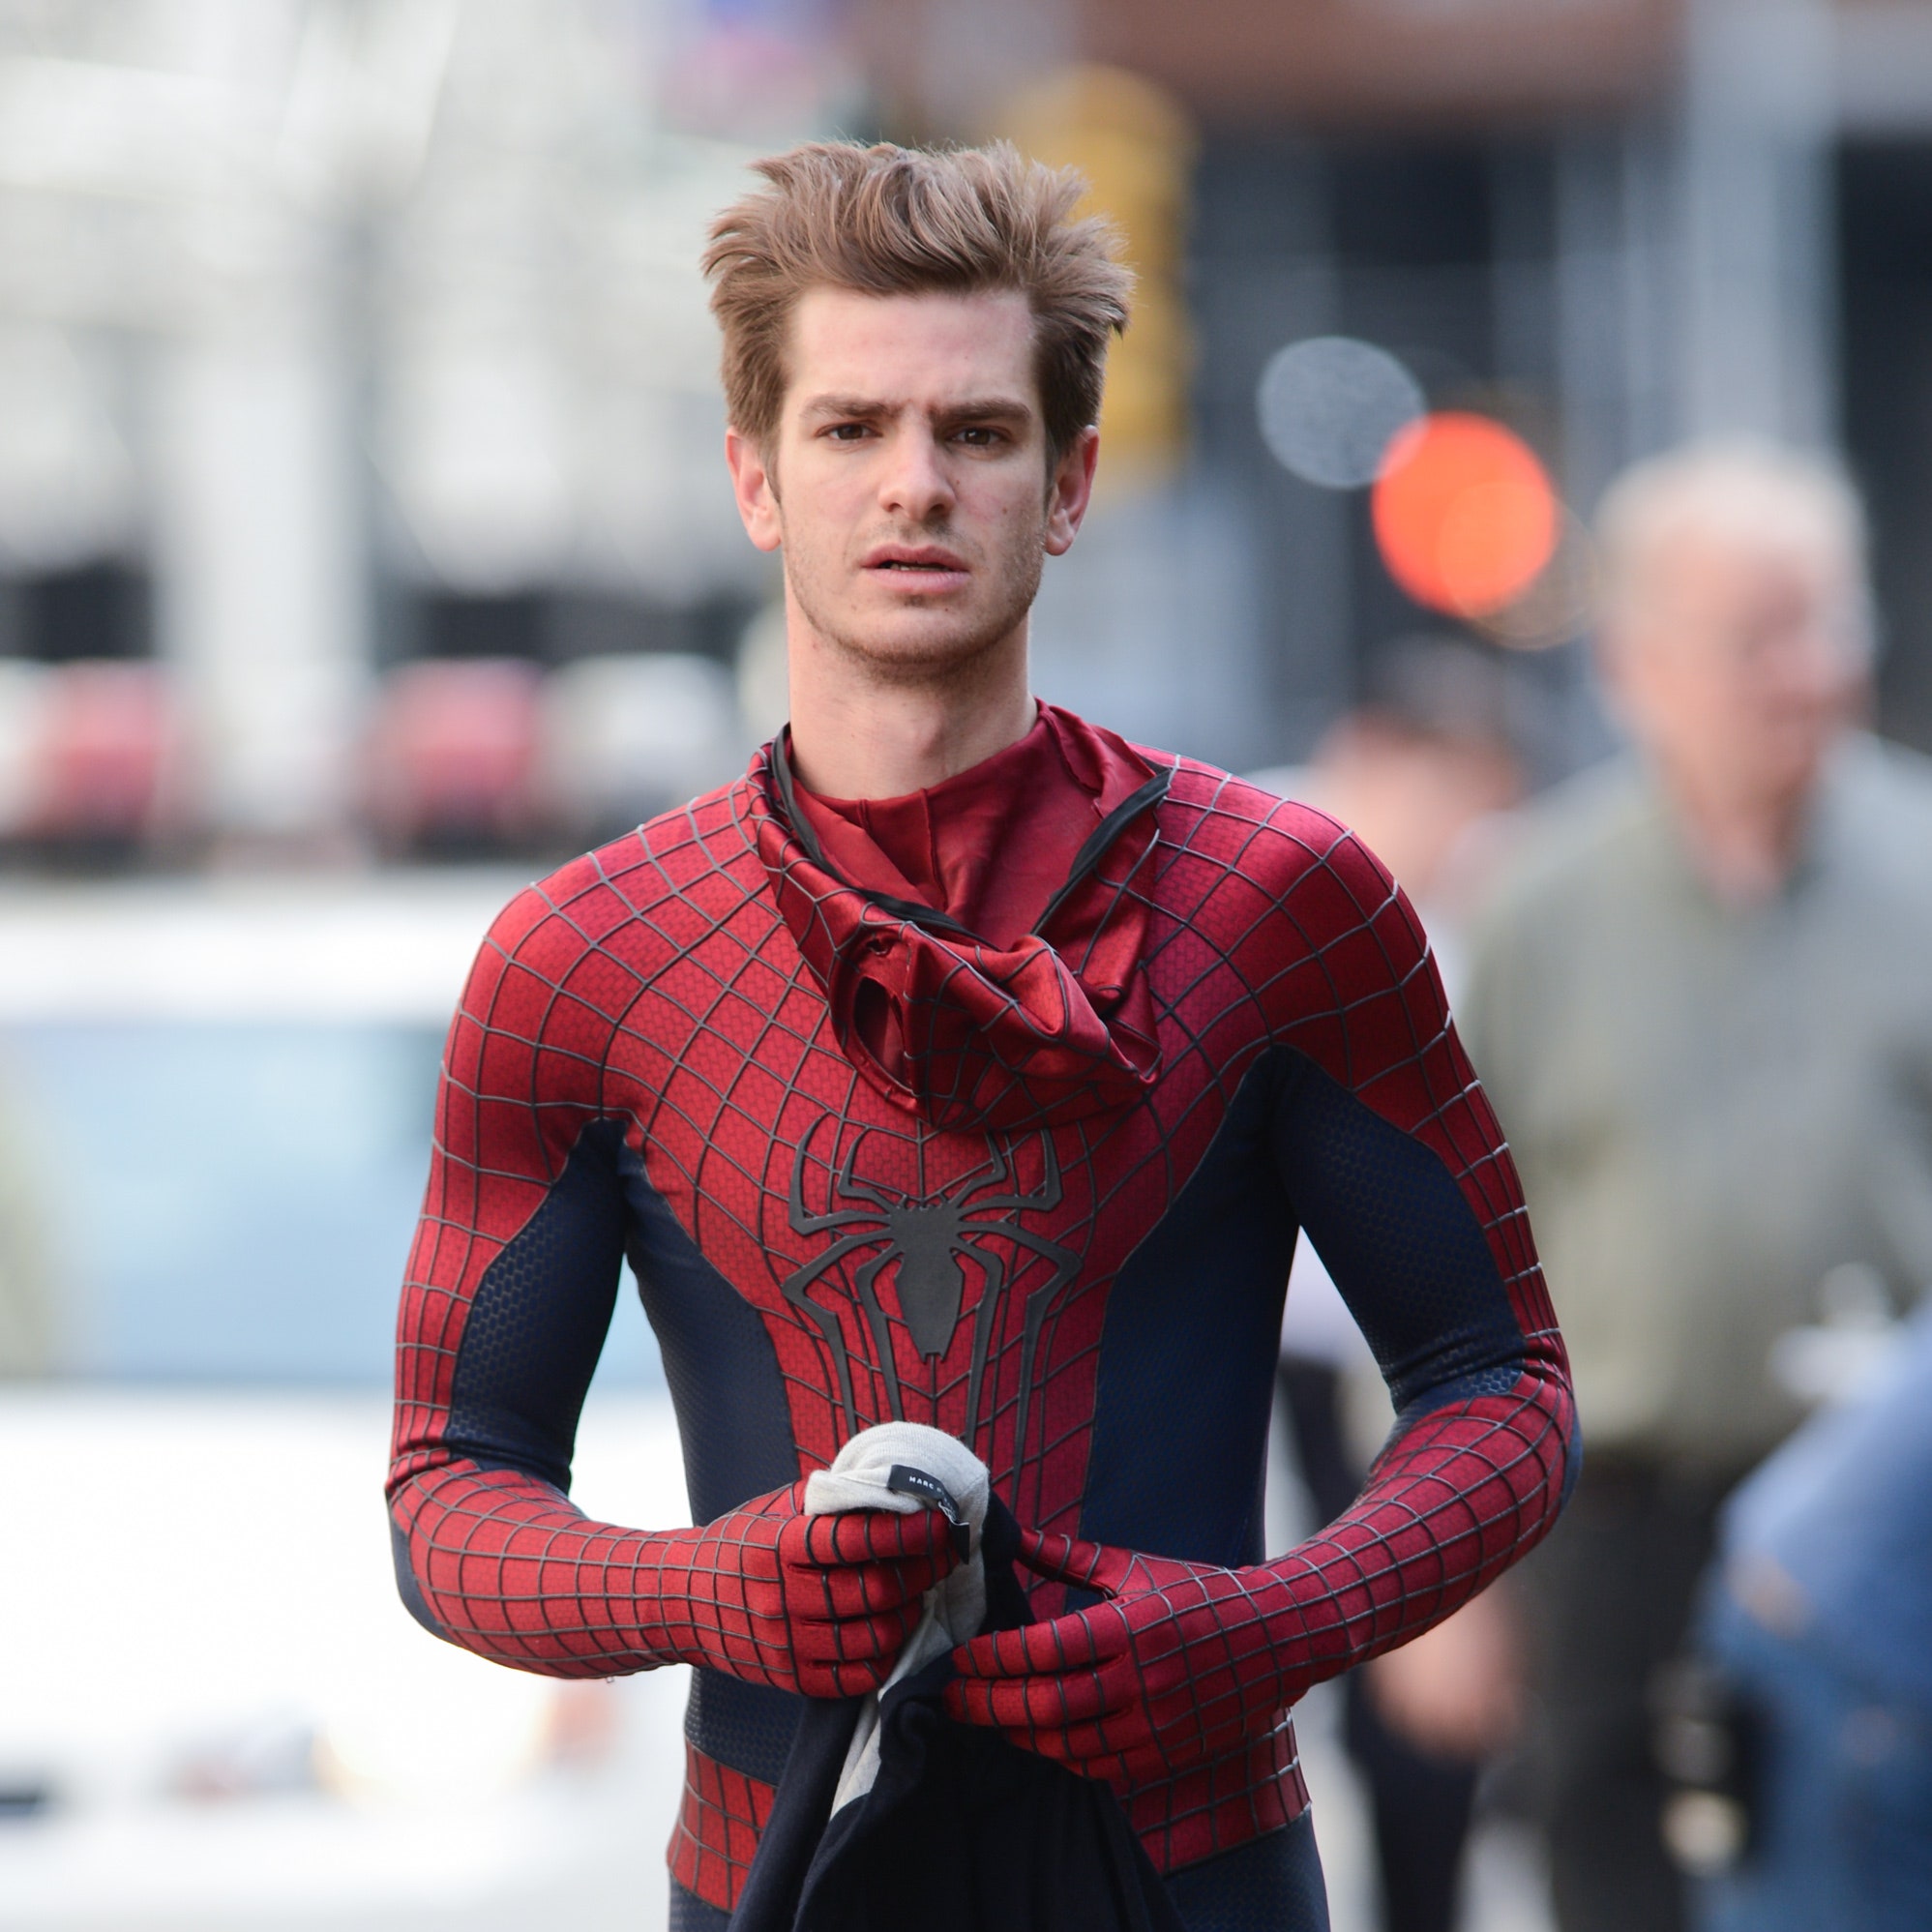 Andrew Garfield Said It “Hurt” To Realize “Spider Man” Was About Making As Much Money As Possible